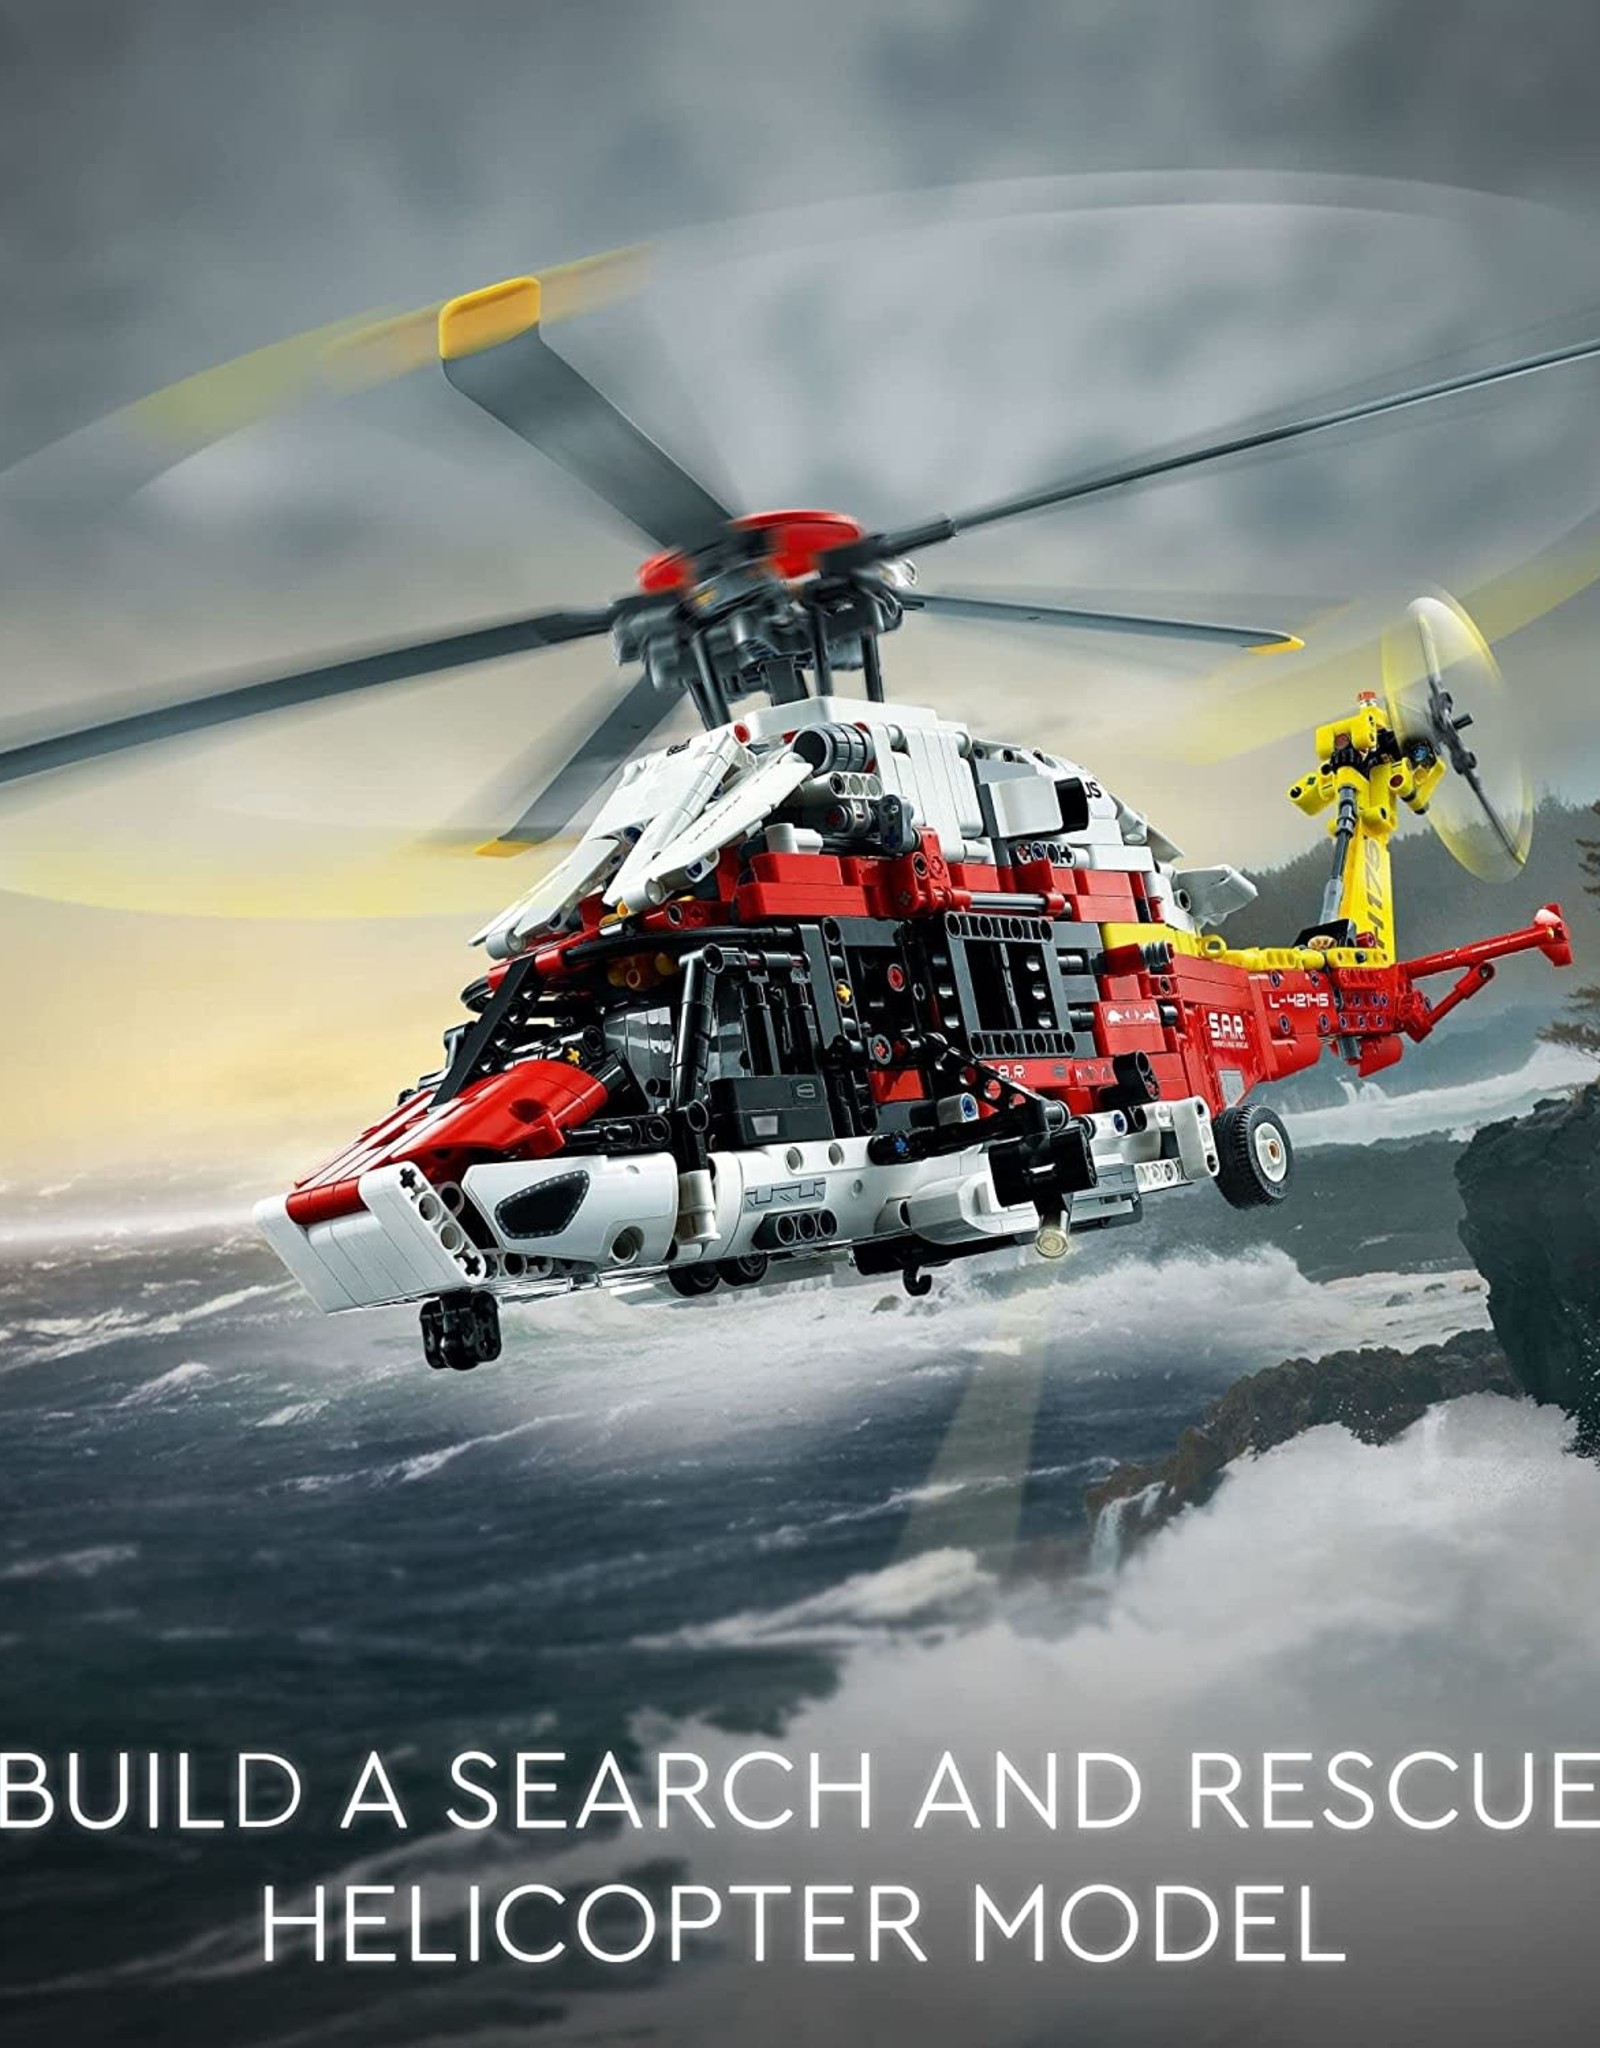 LEGO Lego Technic Airbus H178 Rescue Helicopter